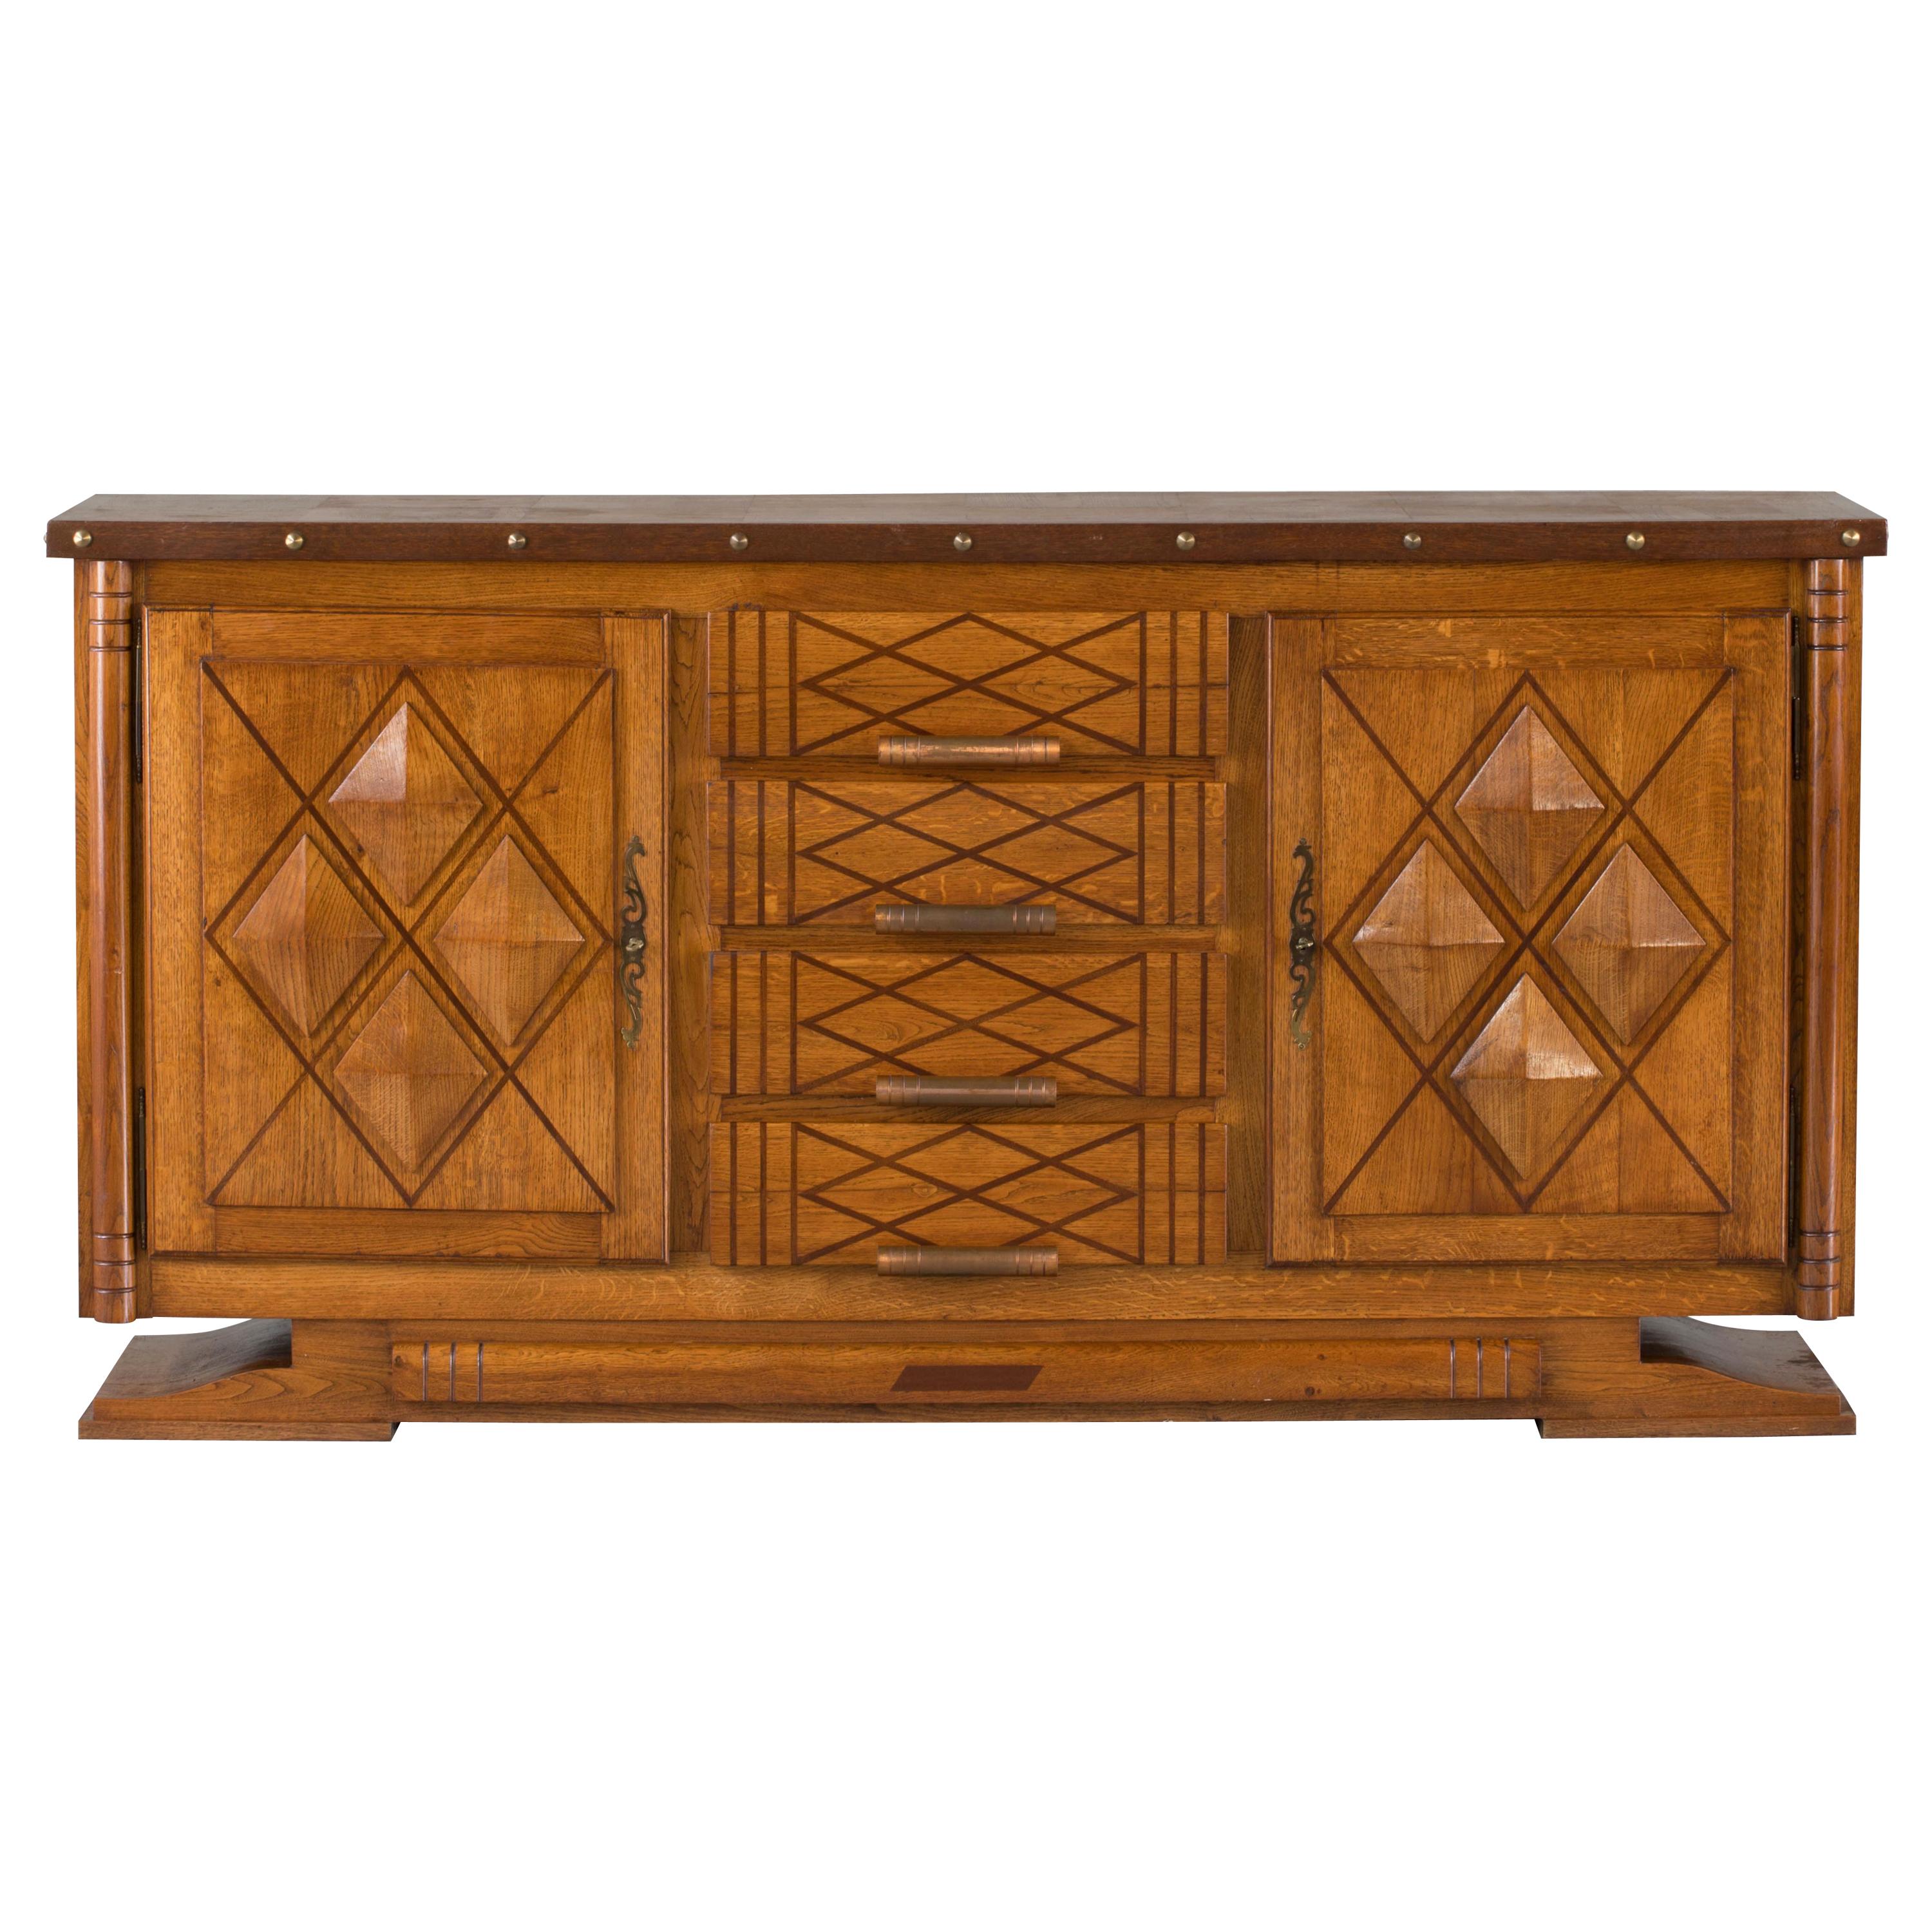 French Art Deco Brutalist Sideboard, 1930s